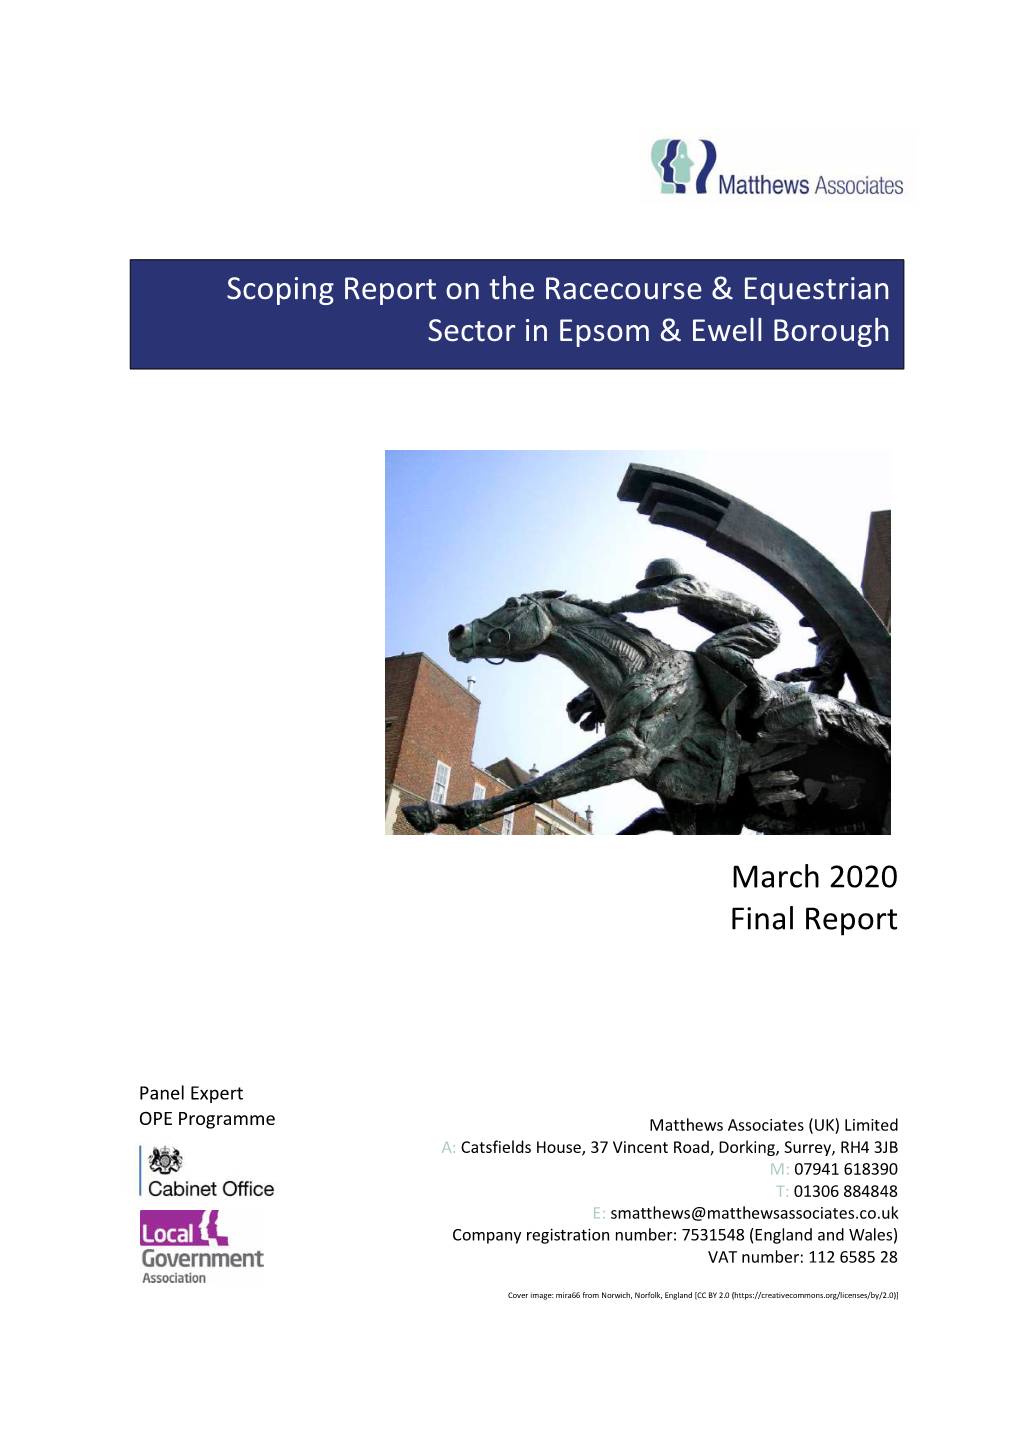 Scoping Report on the Racecourse & Equestrian Sector in Epsom & Ewell